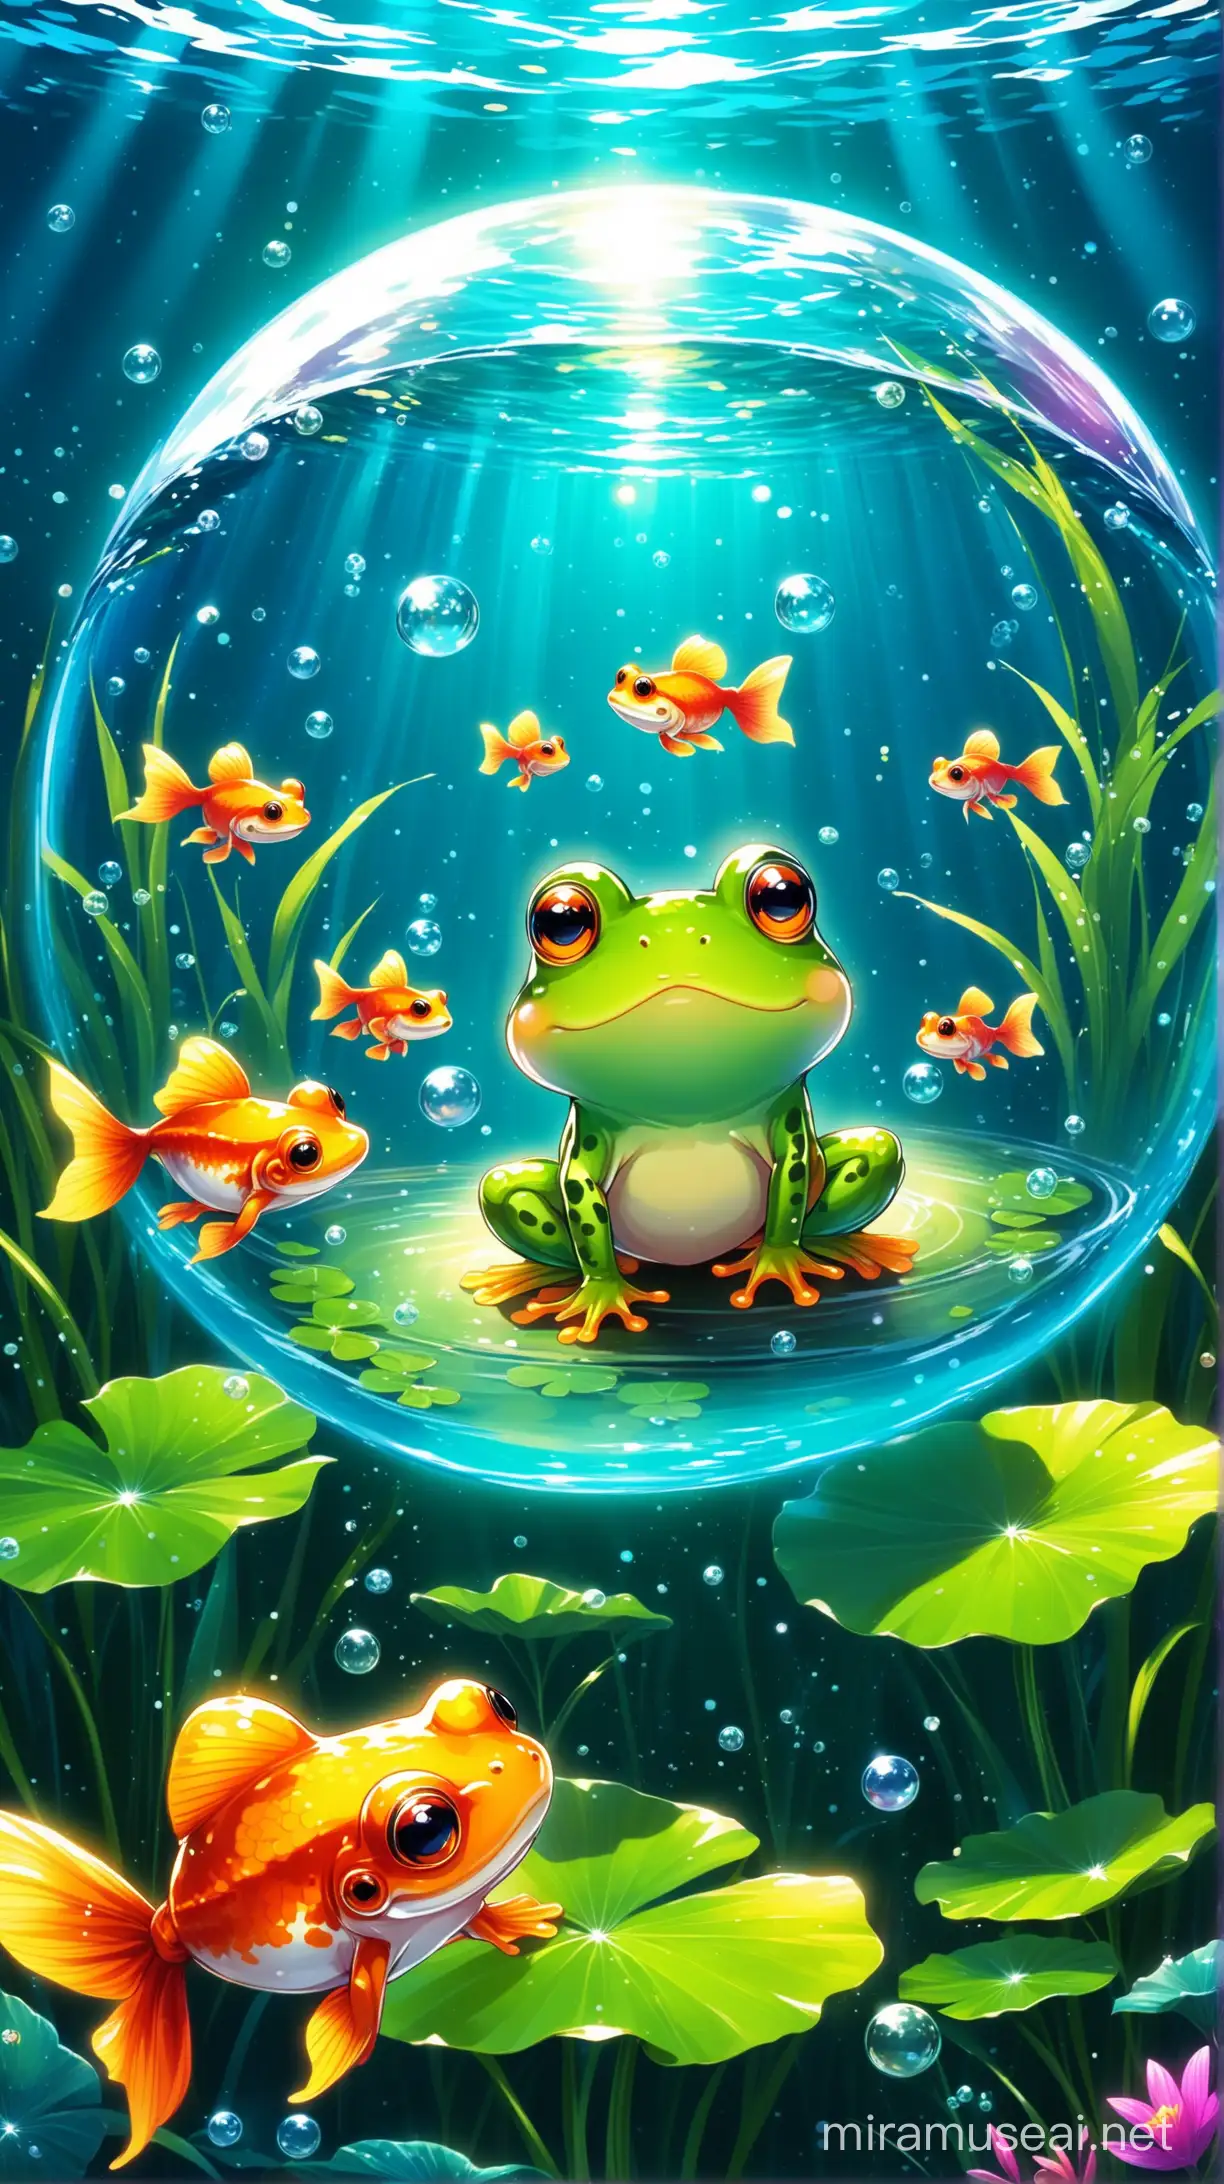 Lively Underwater Scene Frolicking Frog and Playful Goldfish in a Vibrant Pond